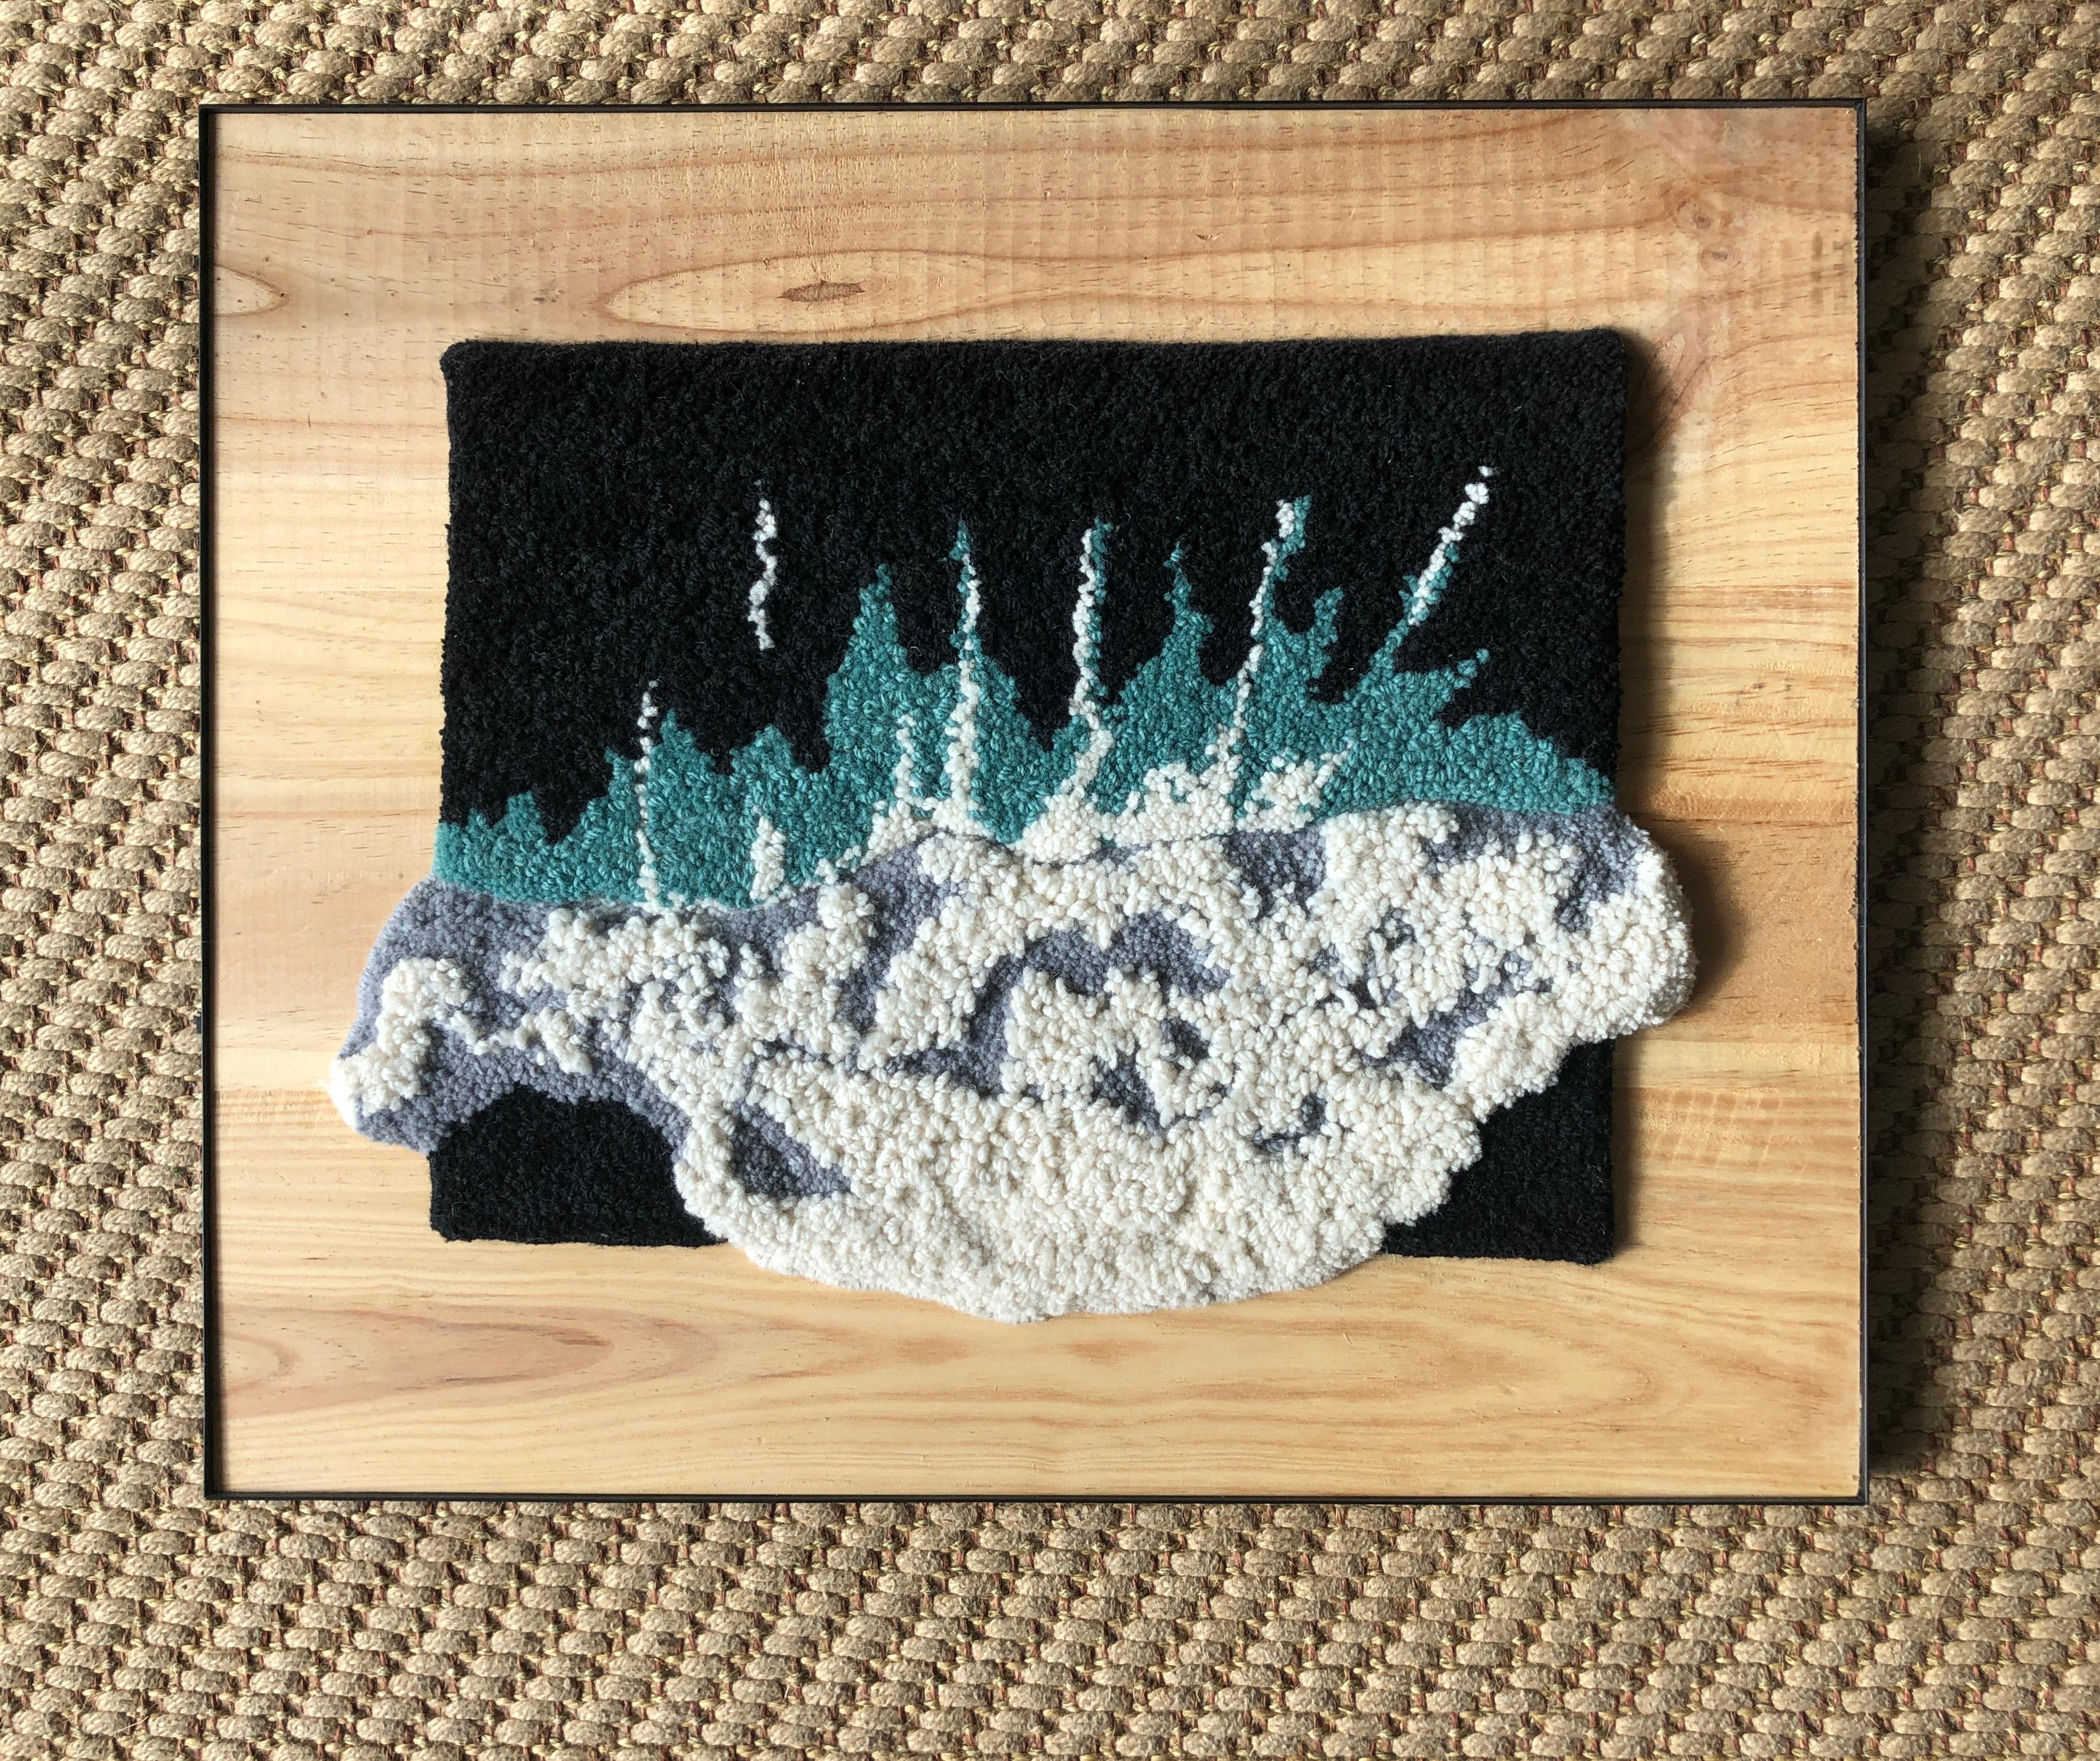 WAVE Tapestry, handmade with 100% Portuguese wool with anti-moth treatment, using punch needle embroidery and carving techniques on a pine frame. Inspired by the ocean, represents the fluid dynamic of a wave breaking moment. 

Estudio OHXOJA is a